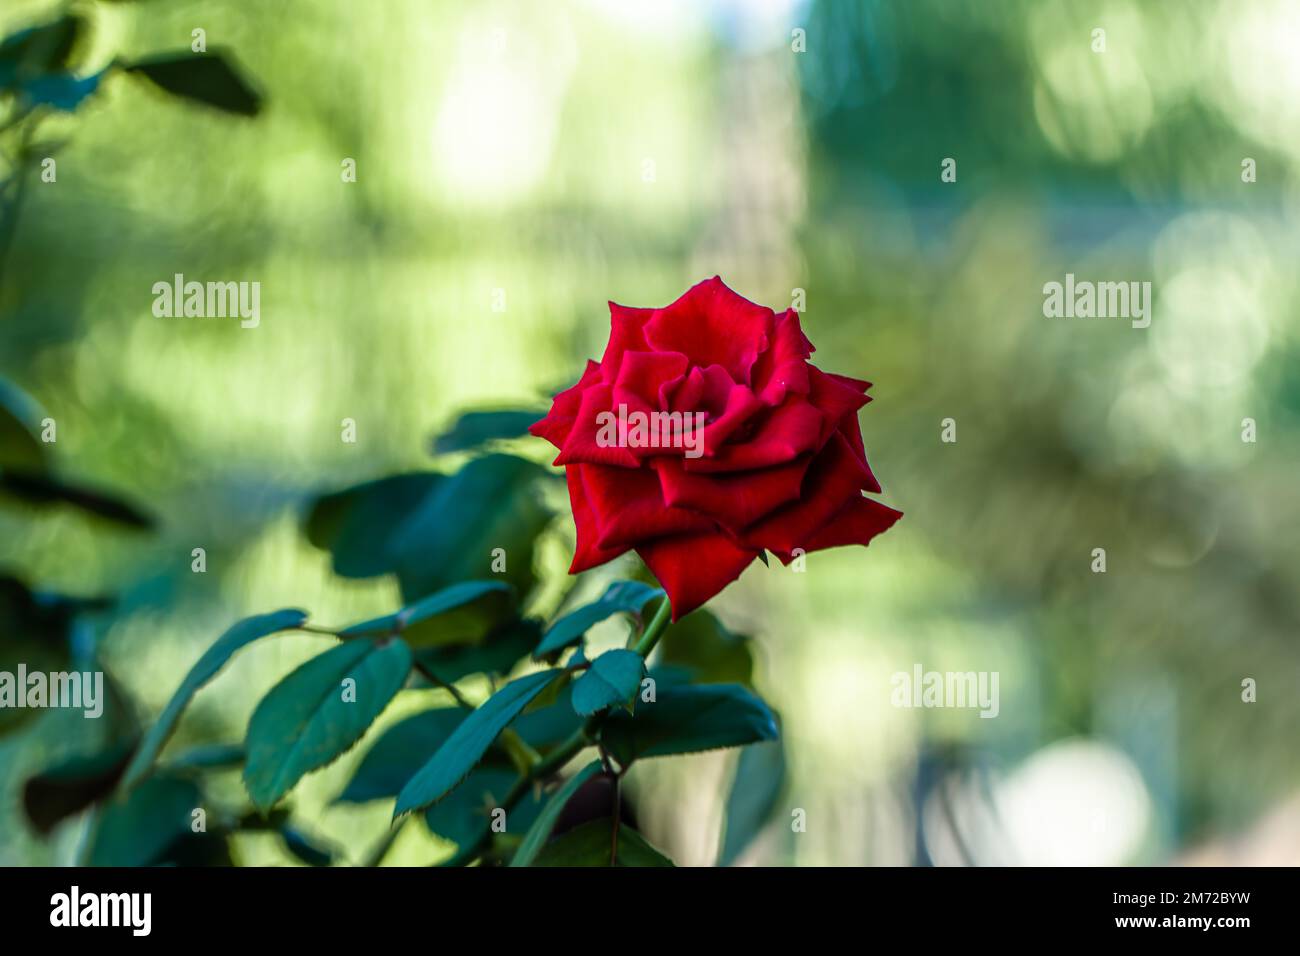 A red rose in bloom has fresh green leaves, blurred foliage background and natural light Stock Photo